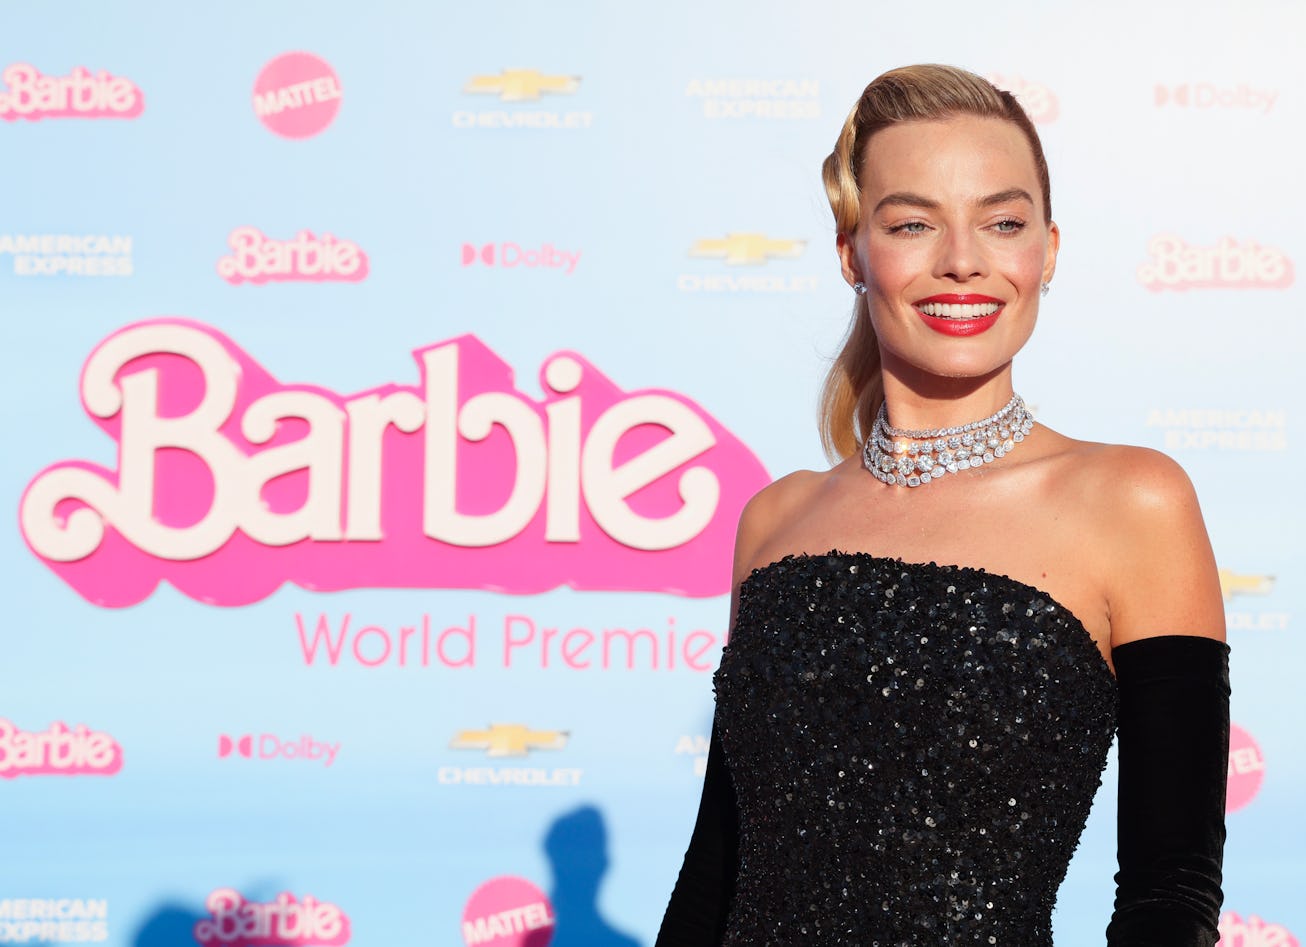 LOS ANGELES, CALIFORNIA - JULY 09: Margot Robbie attends the World Premiere of "Barbie" at Shrine Au...